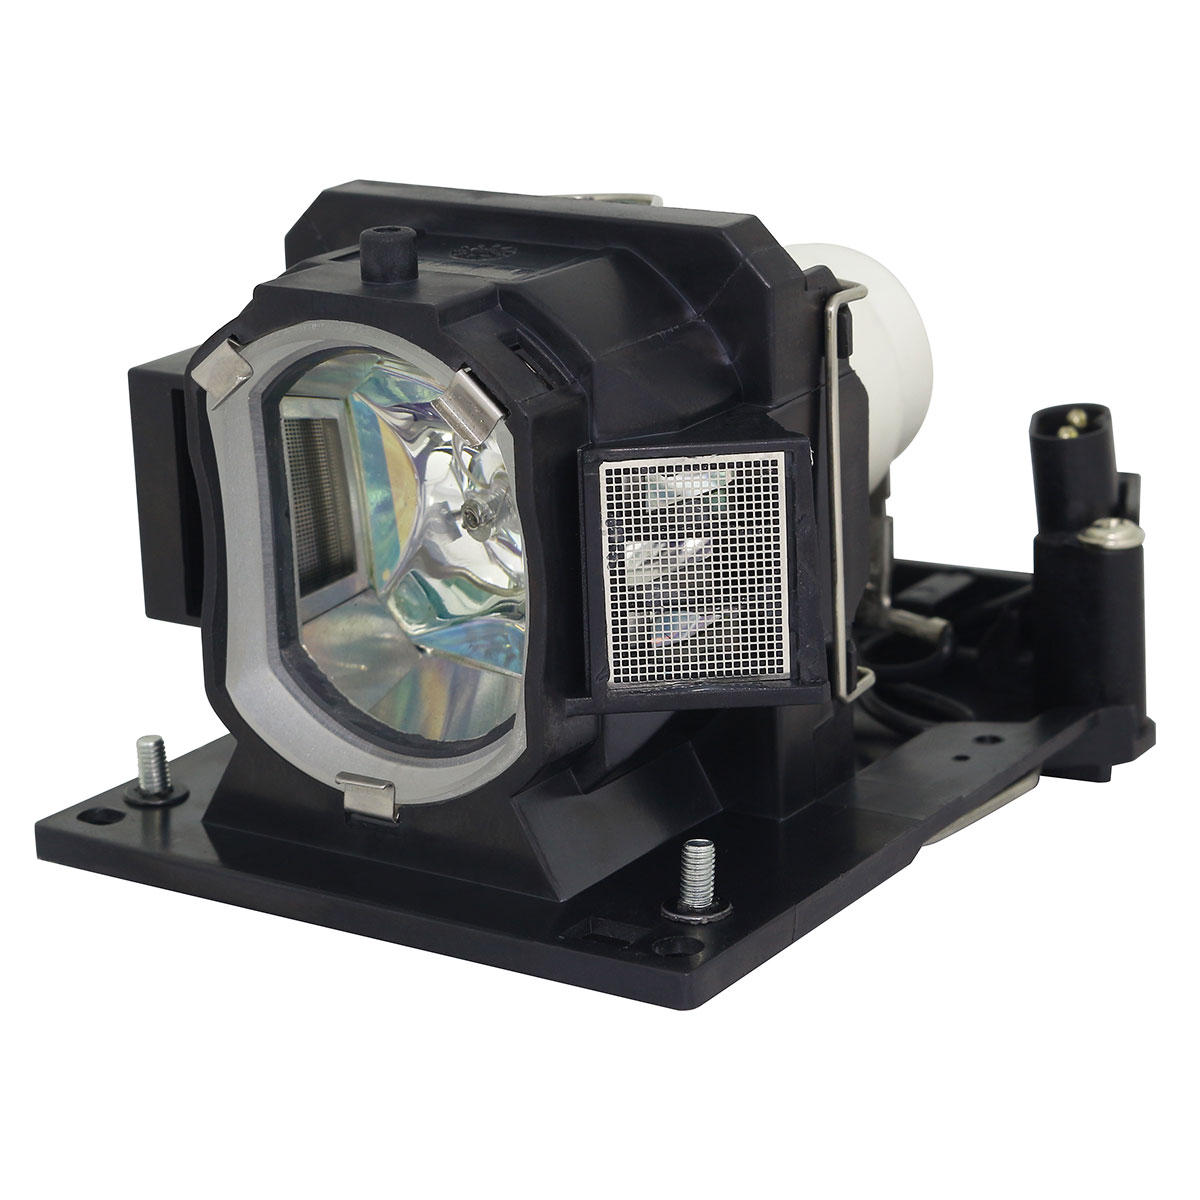 DT01491 Replacement Lamp & Housing for Hitachi Projectors - image 2 of 6